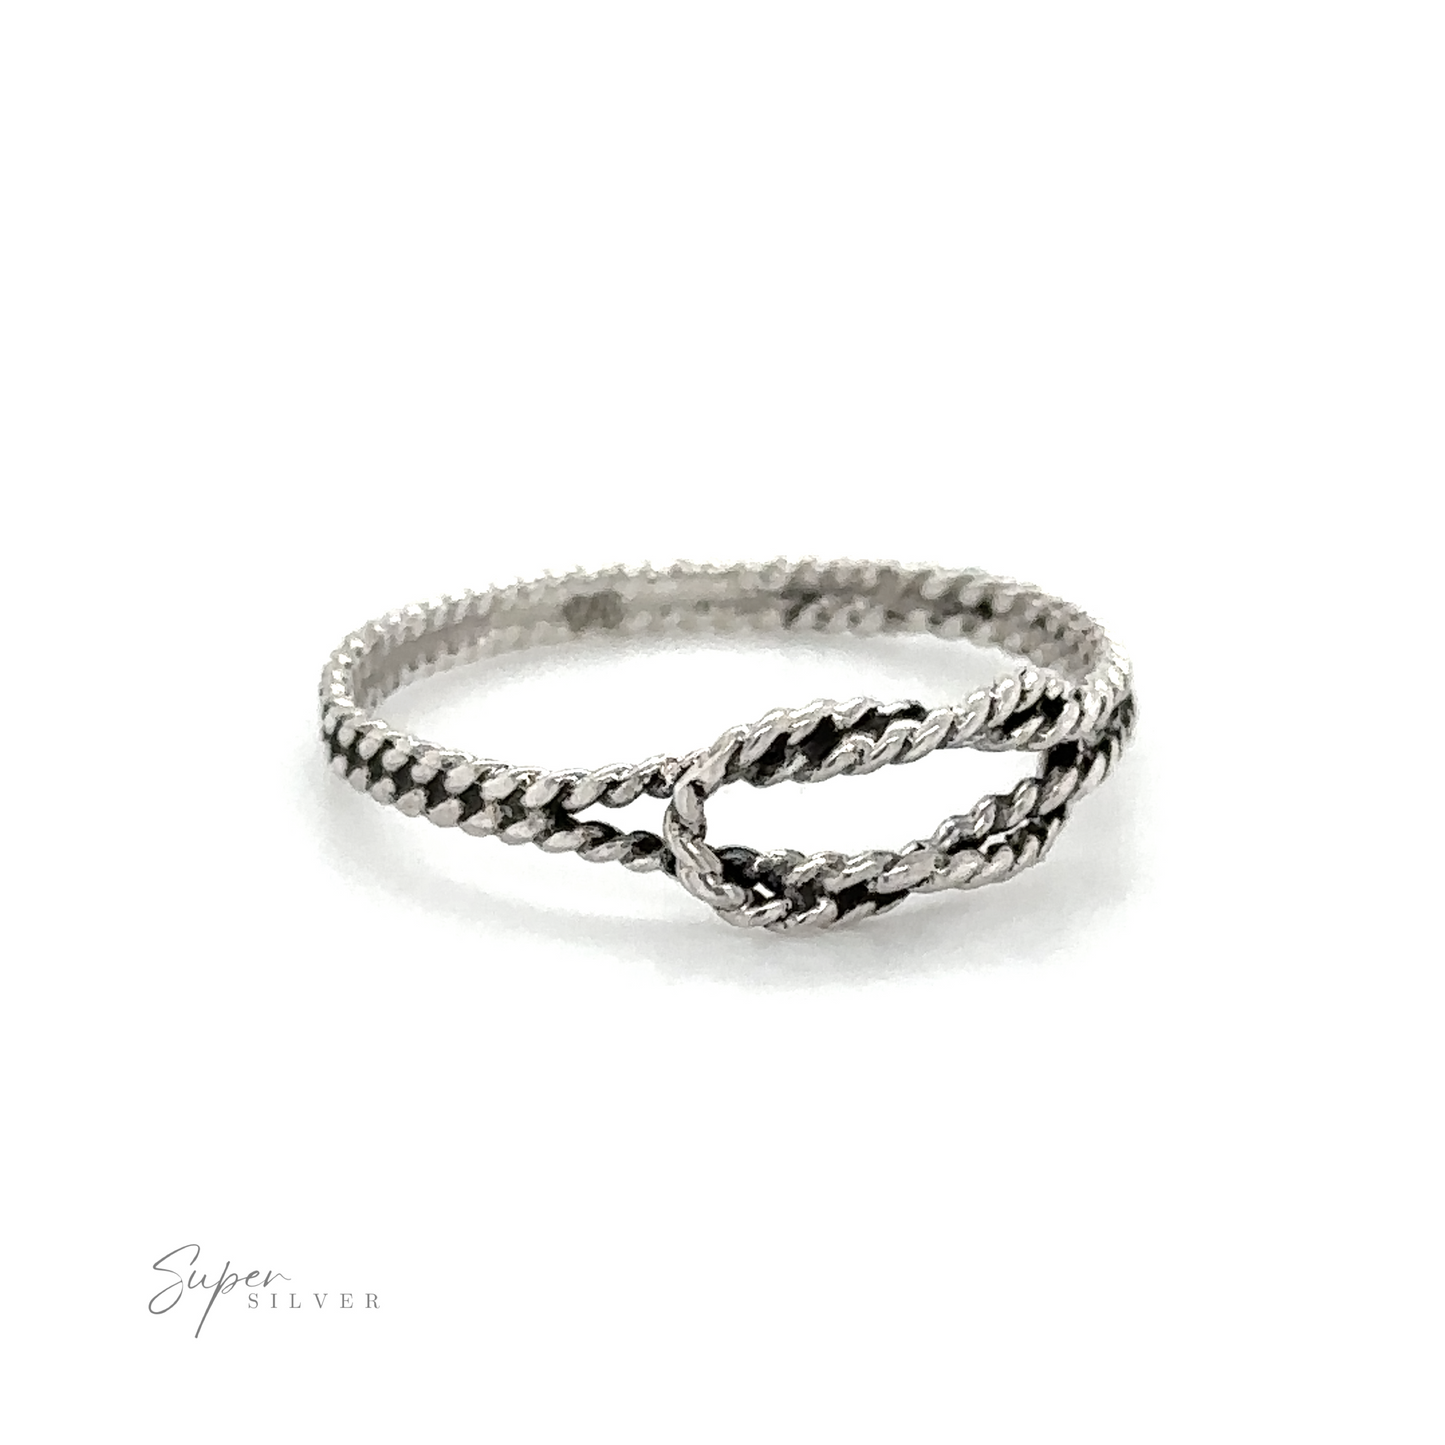 A minimalist sterling silver Rope Square Knot ring.